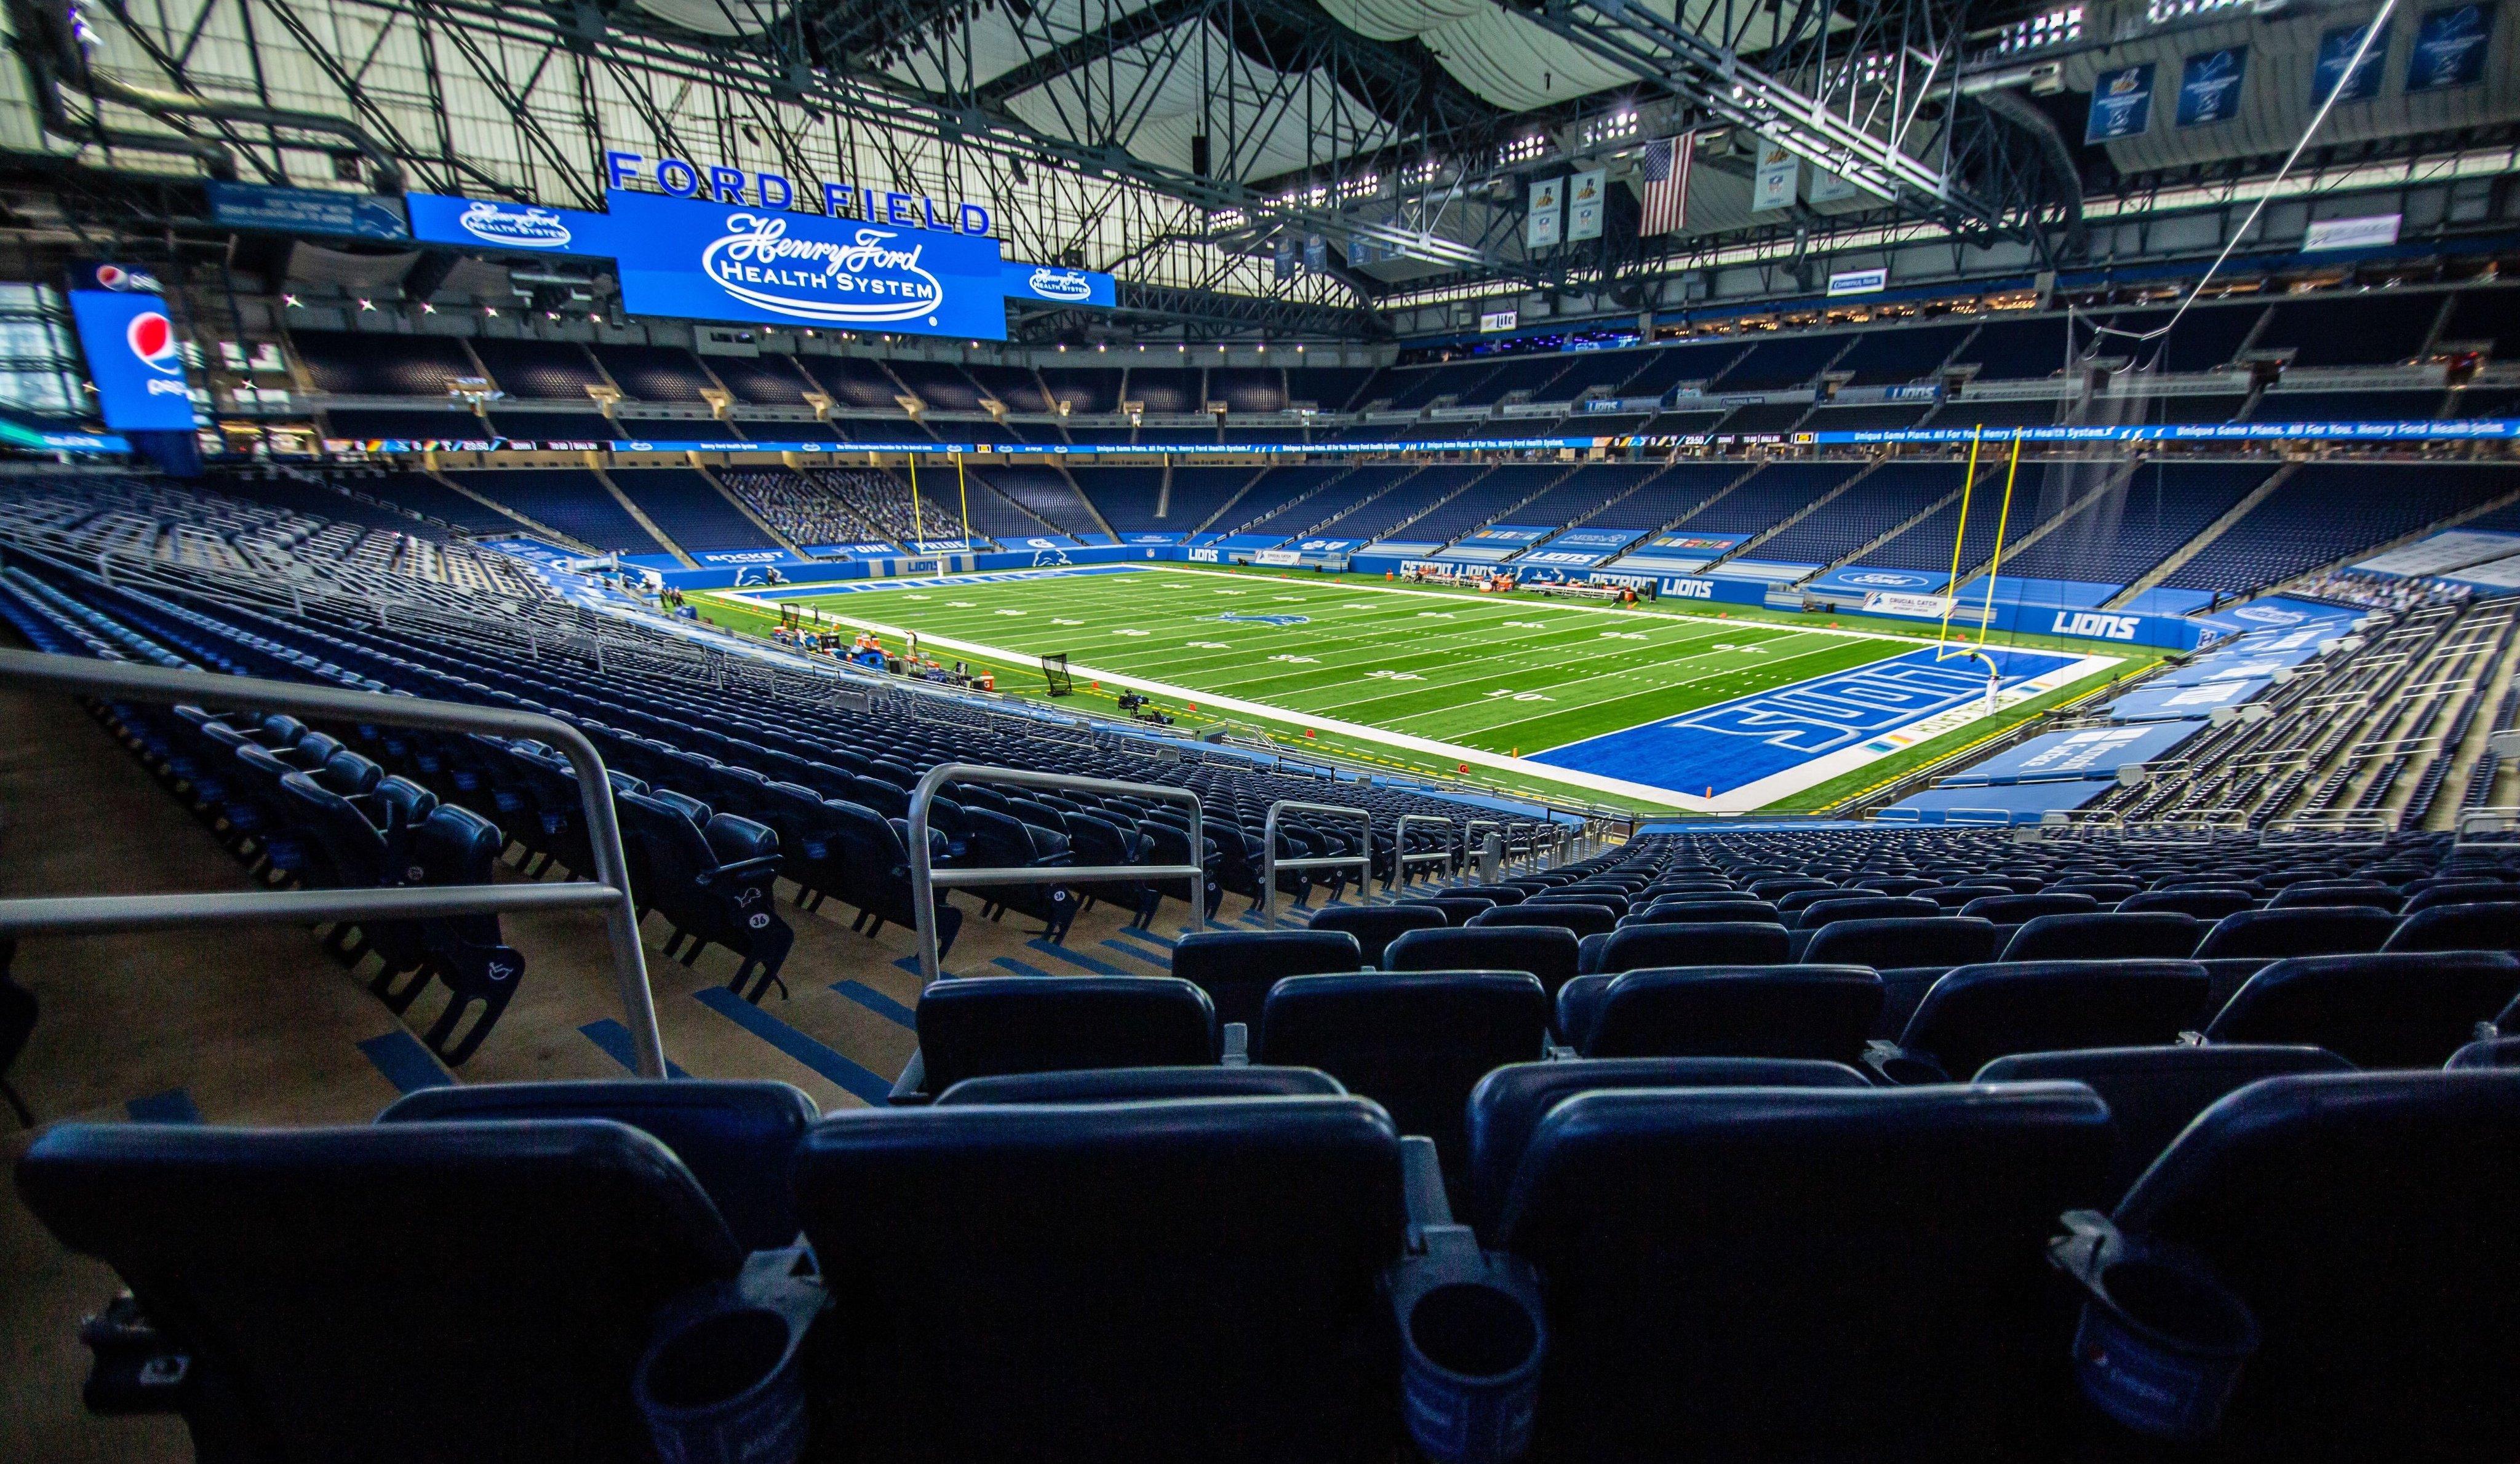 The Detroit Lions stadium, Ford Field